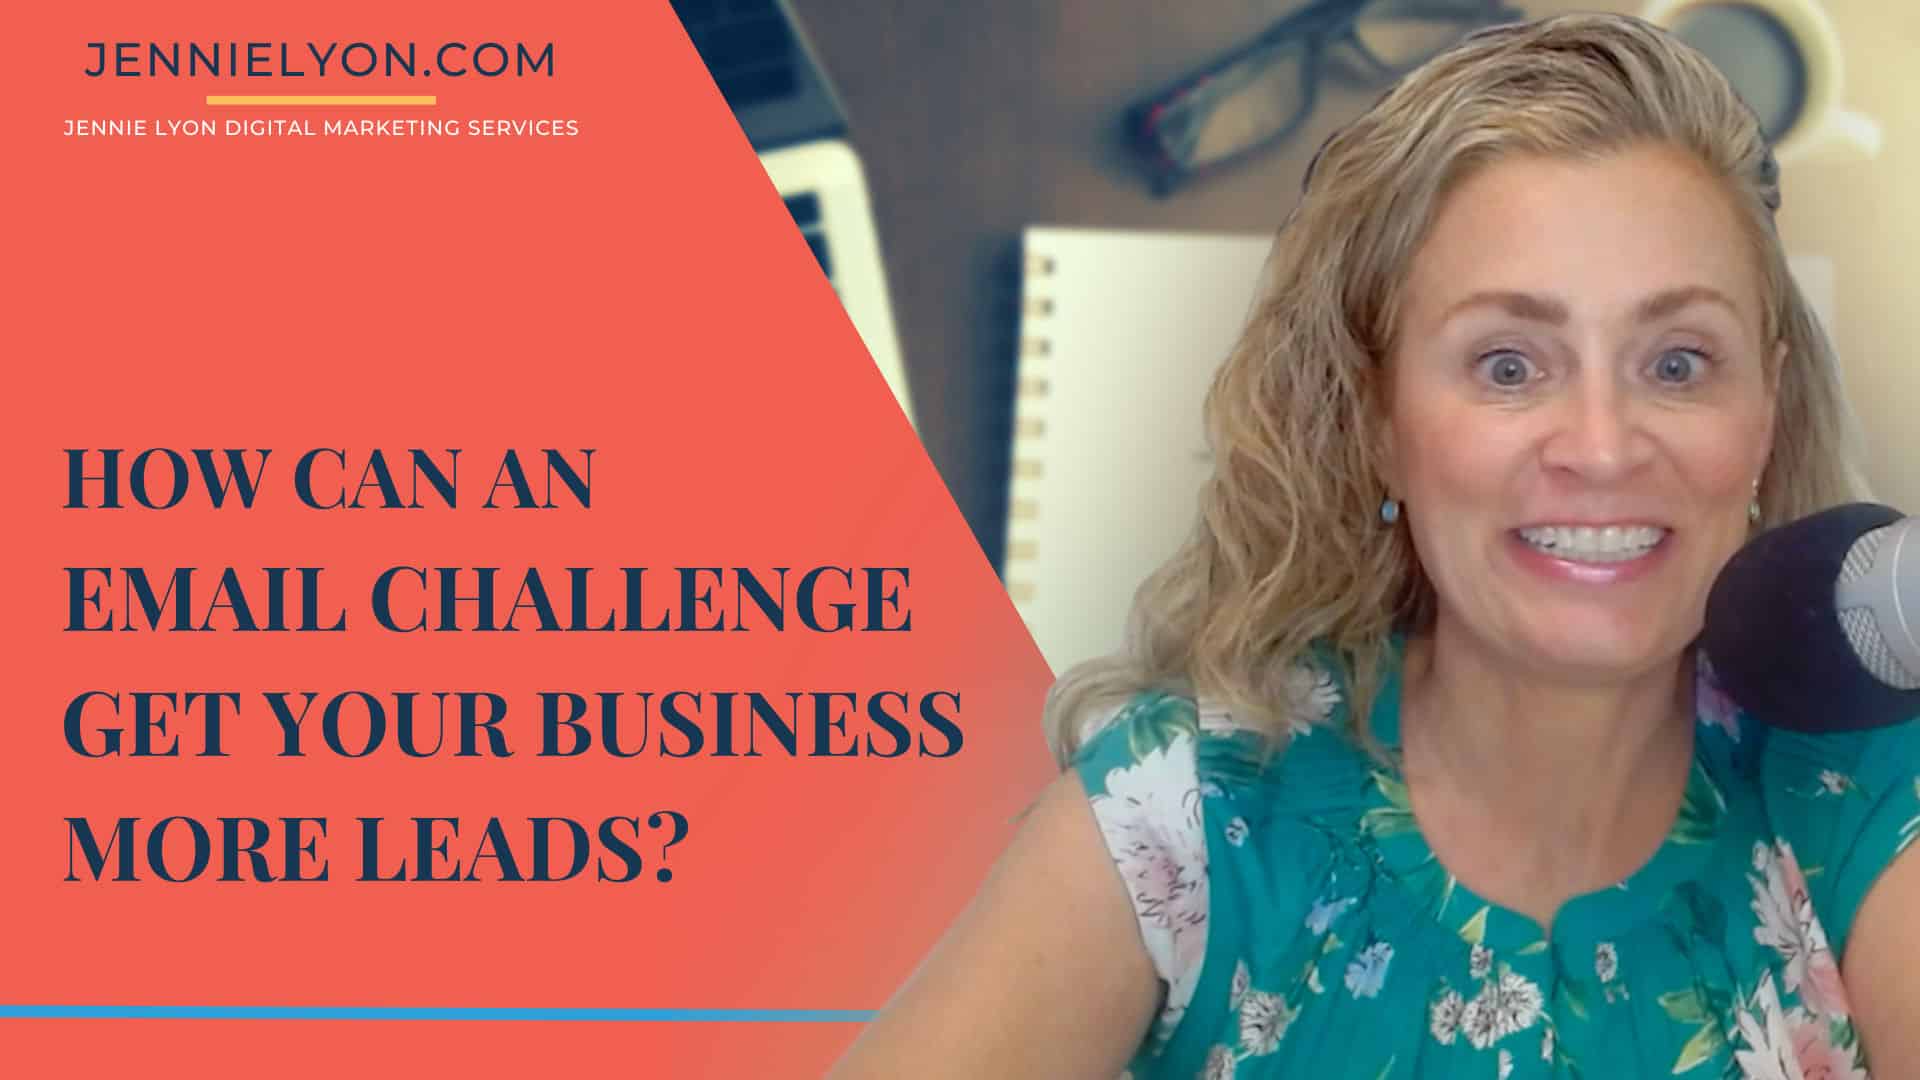 How Can an Email Challenge Get Your Business More Leads?